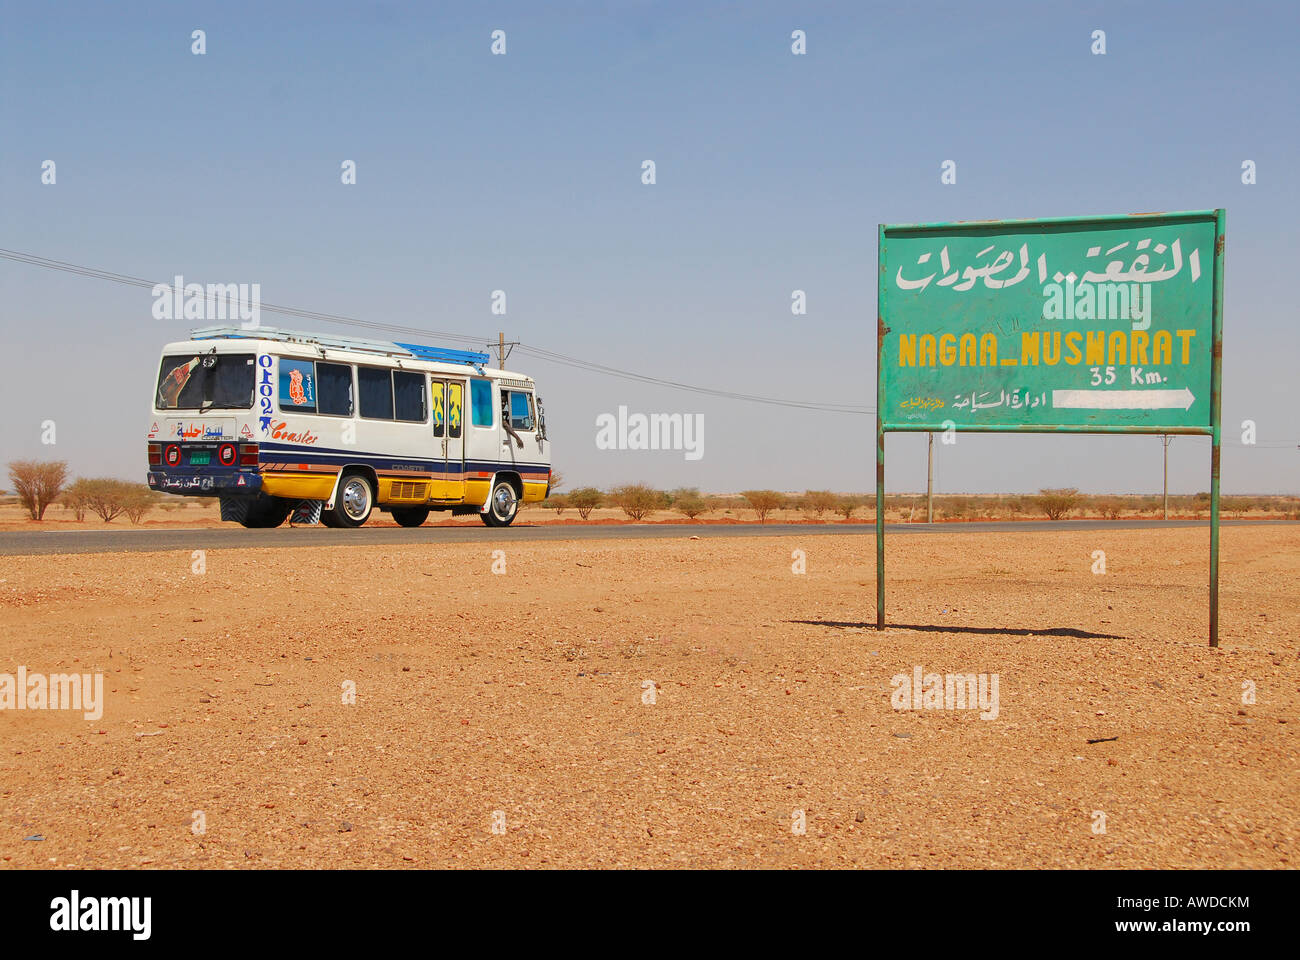 Bus on a country road near Naga, Sudan, Africa Stock Photo